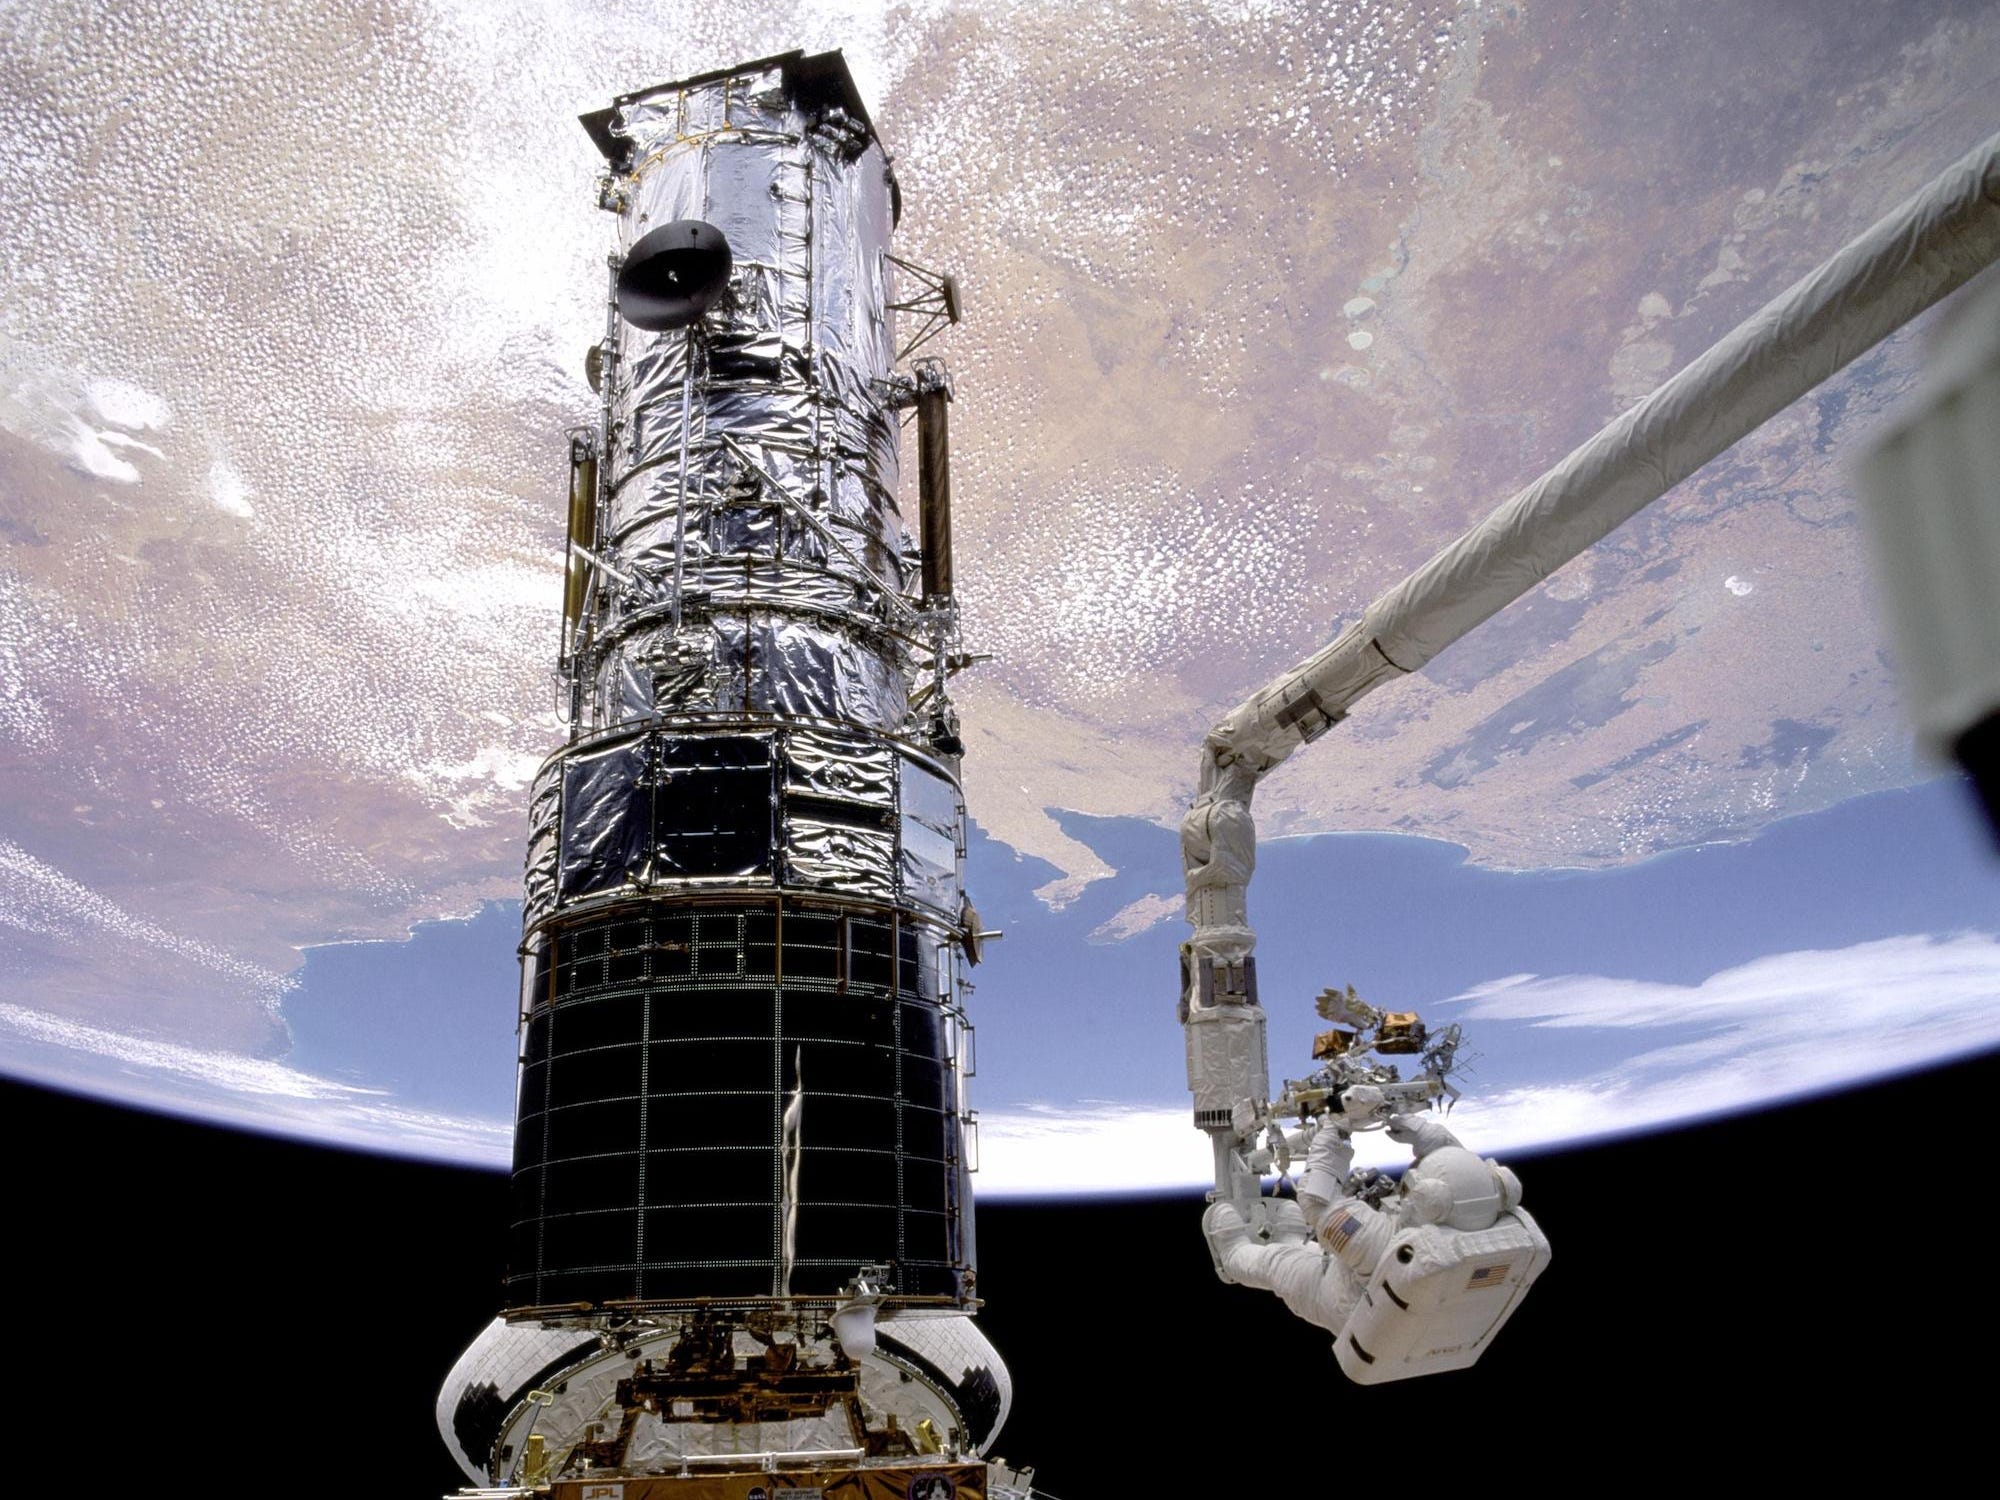 two astronauts in spacesuits work on the hubble space telescope in space above earth